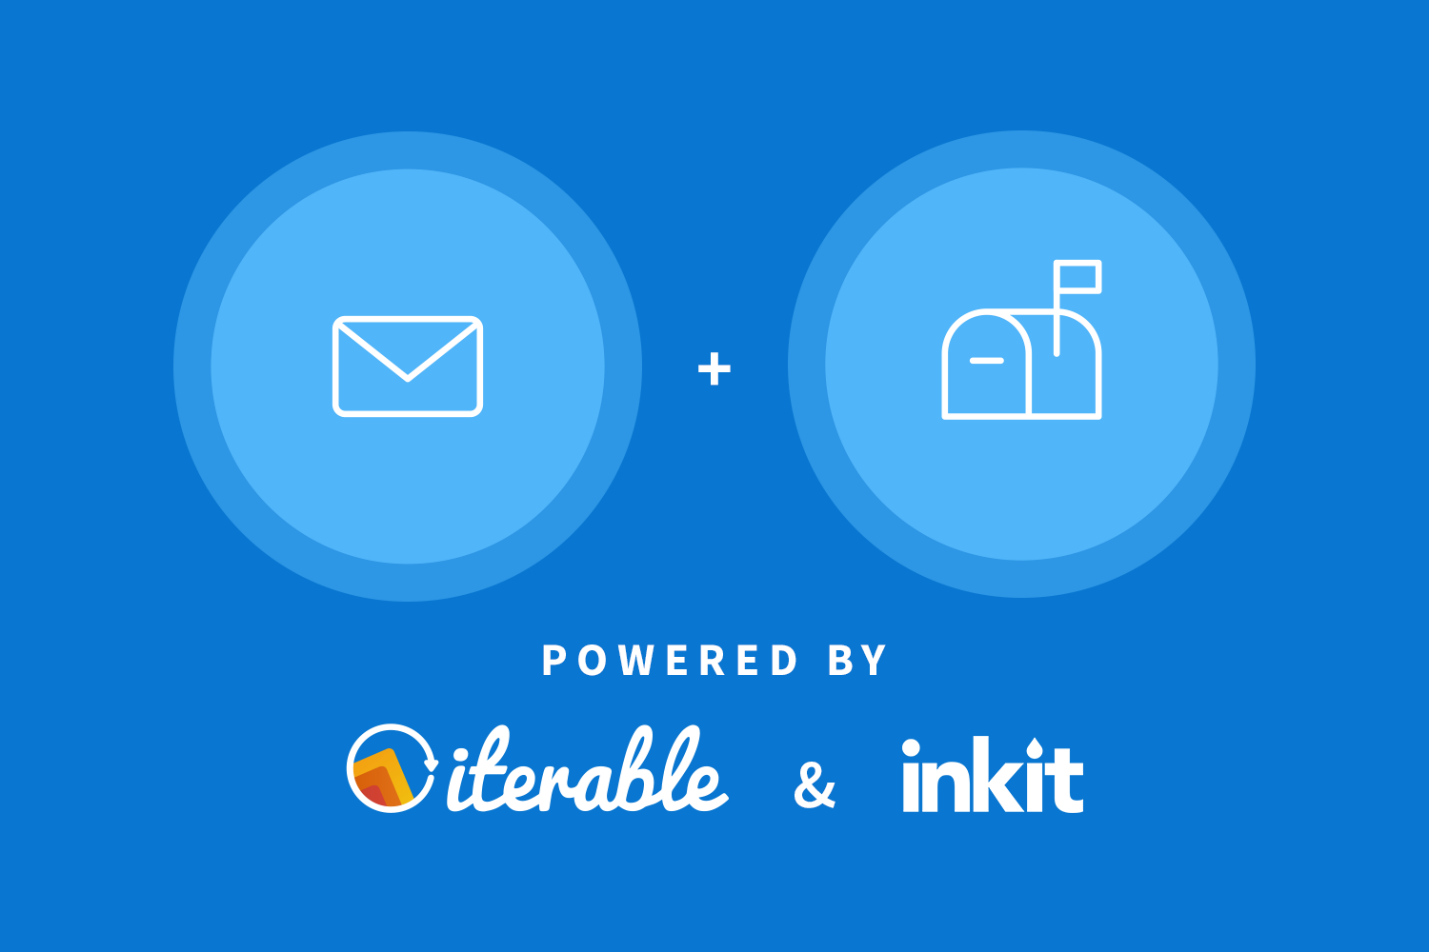 The Iterable + Inkit integration